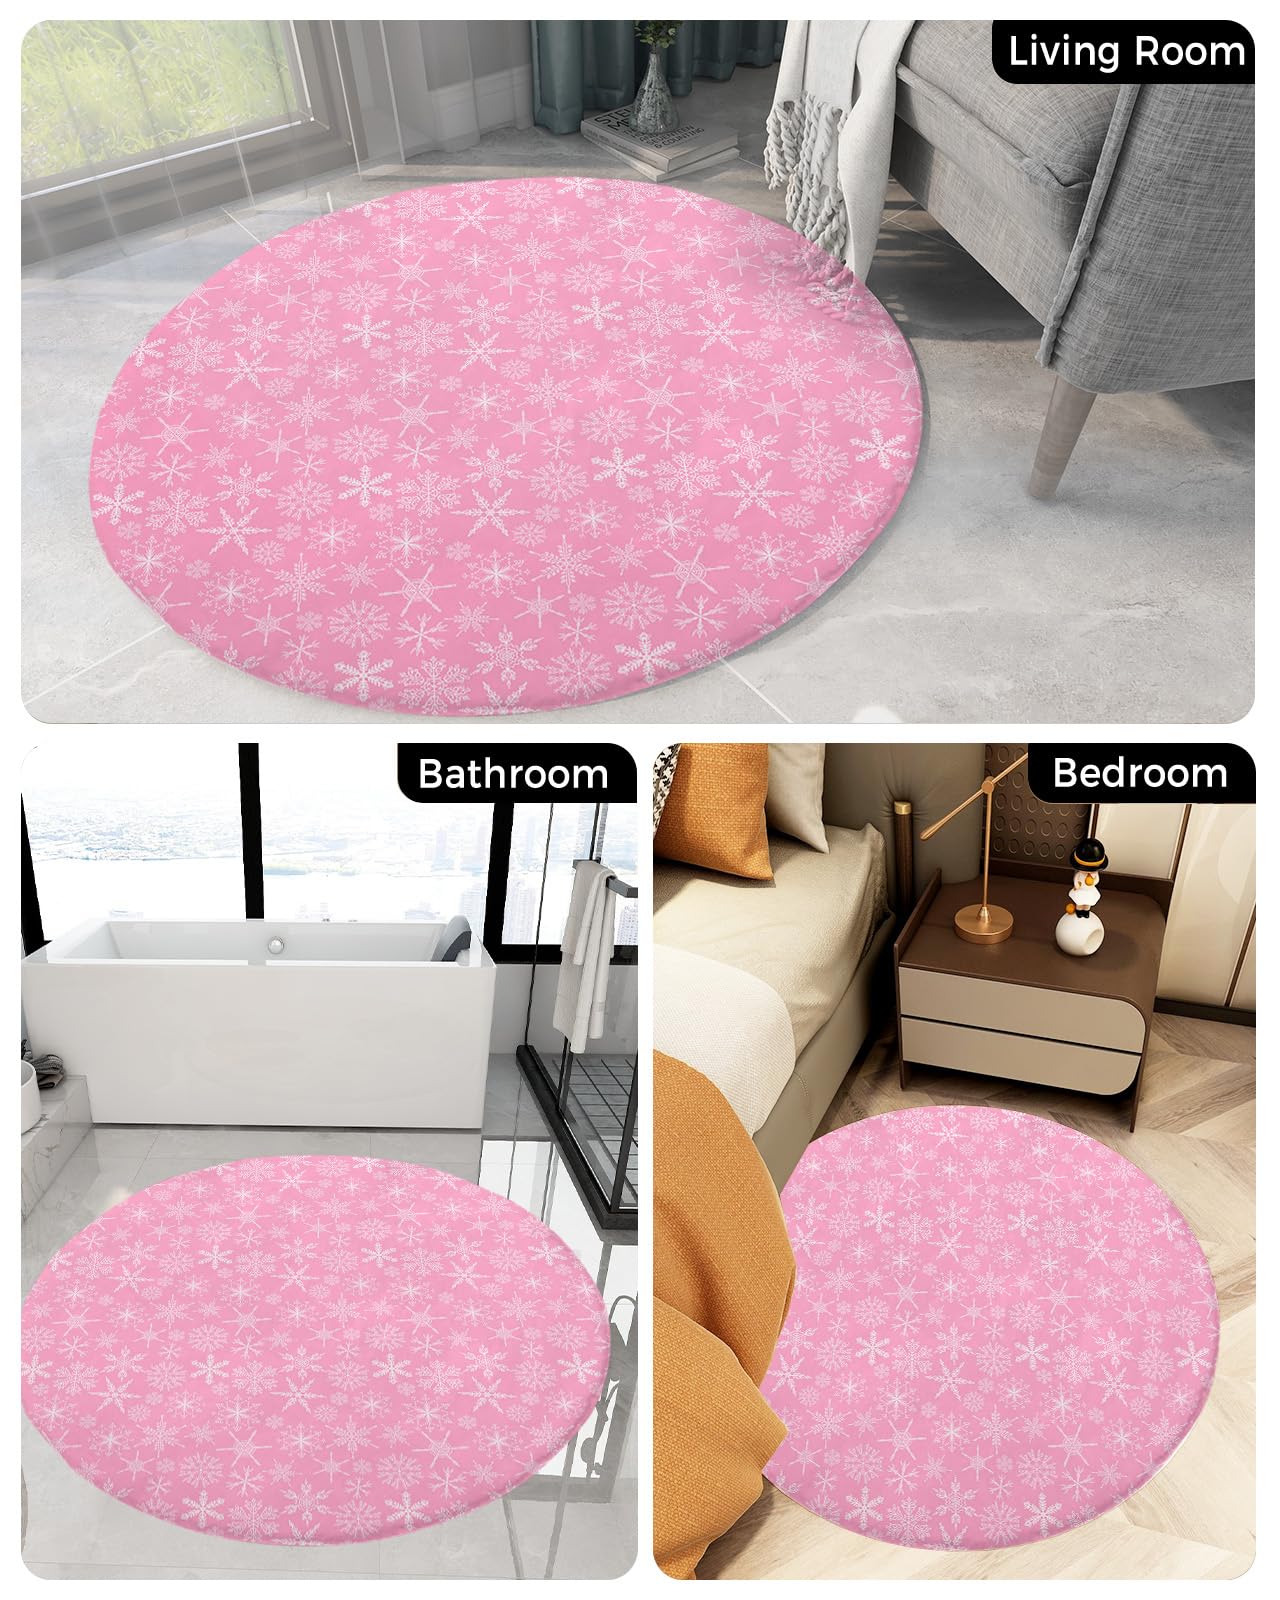 Pink Christmas Fluffy Round Area Rug Carpets 4ft, Plush Shaggy Carpet Soft Circular Rugs, Non-Slip Fuzzy Accent Floor Mat for Living Room Bedroom Nursery Home Decor Winter Fantasy Snowflake